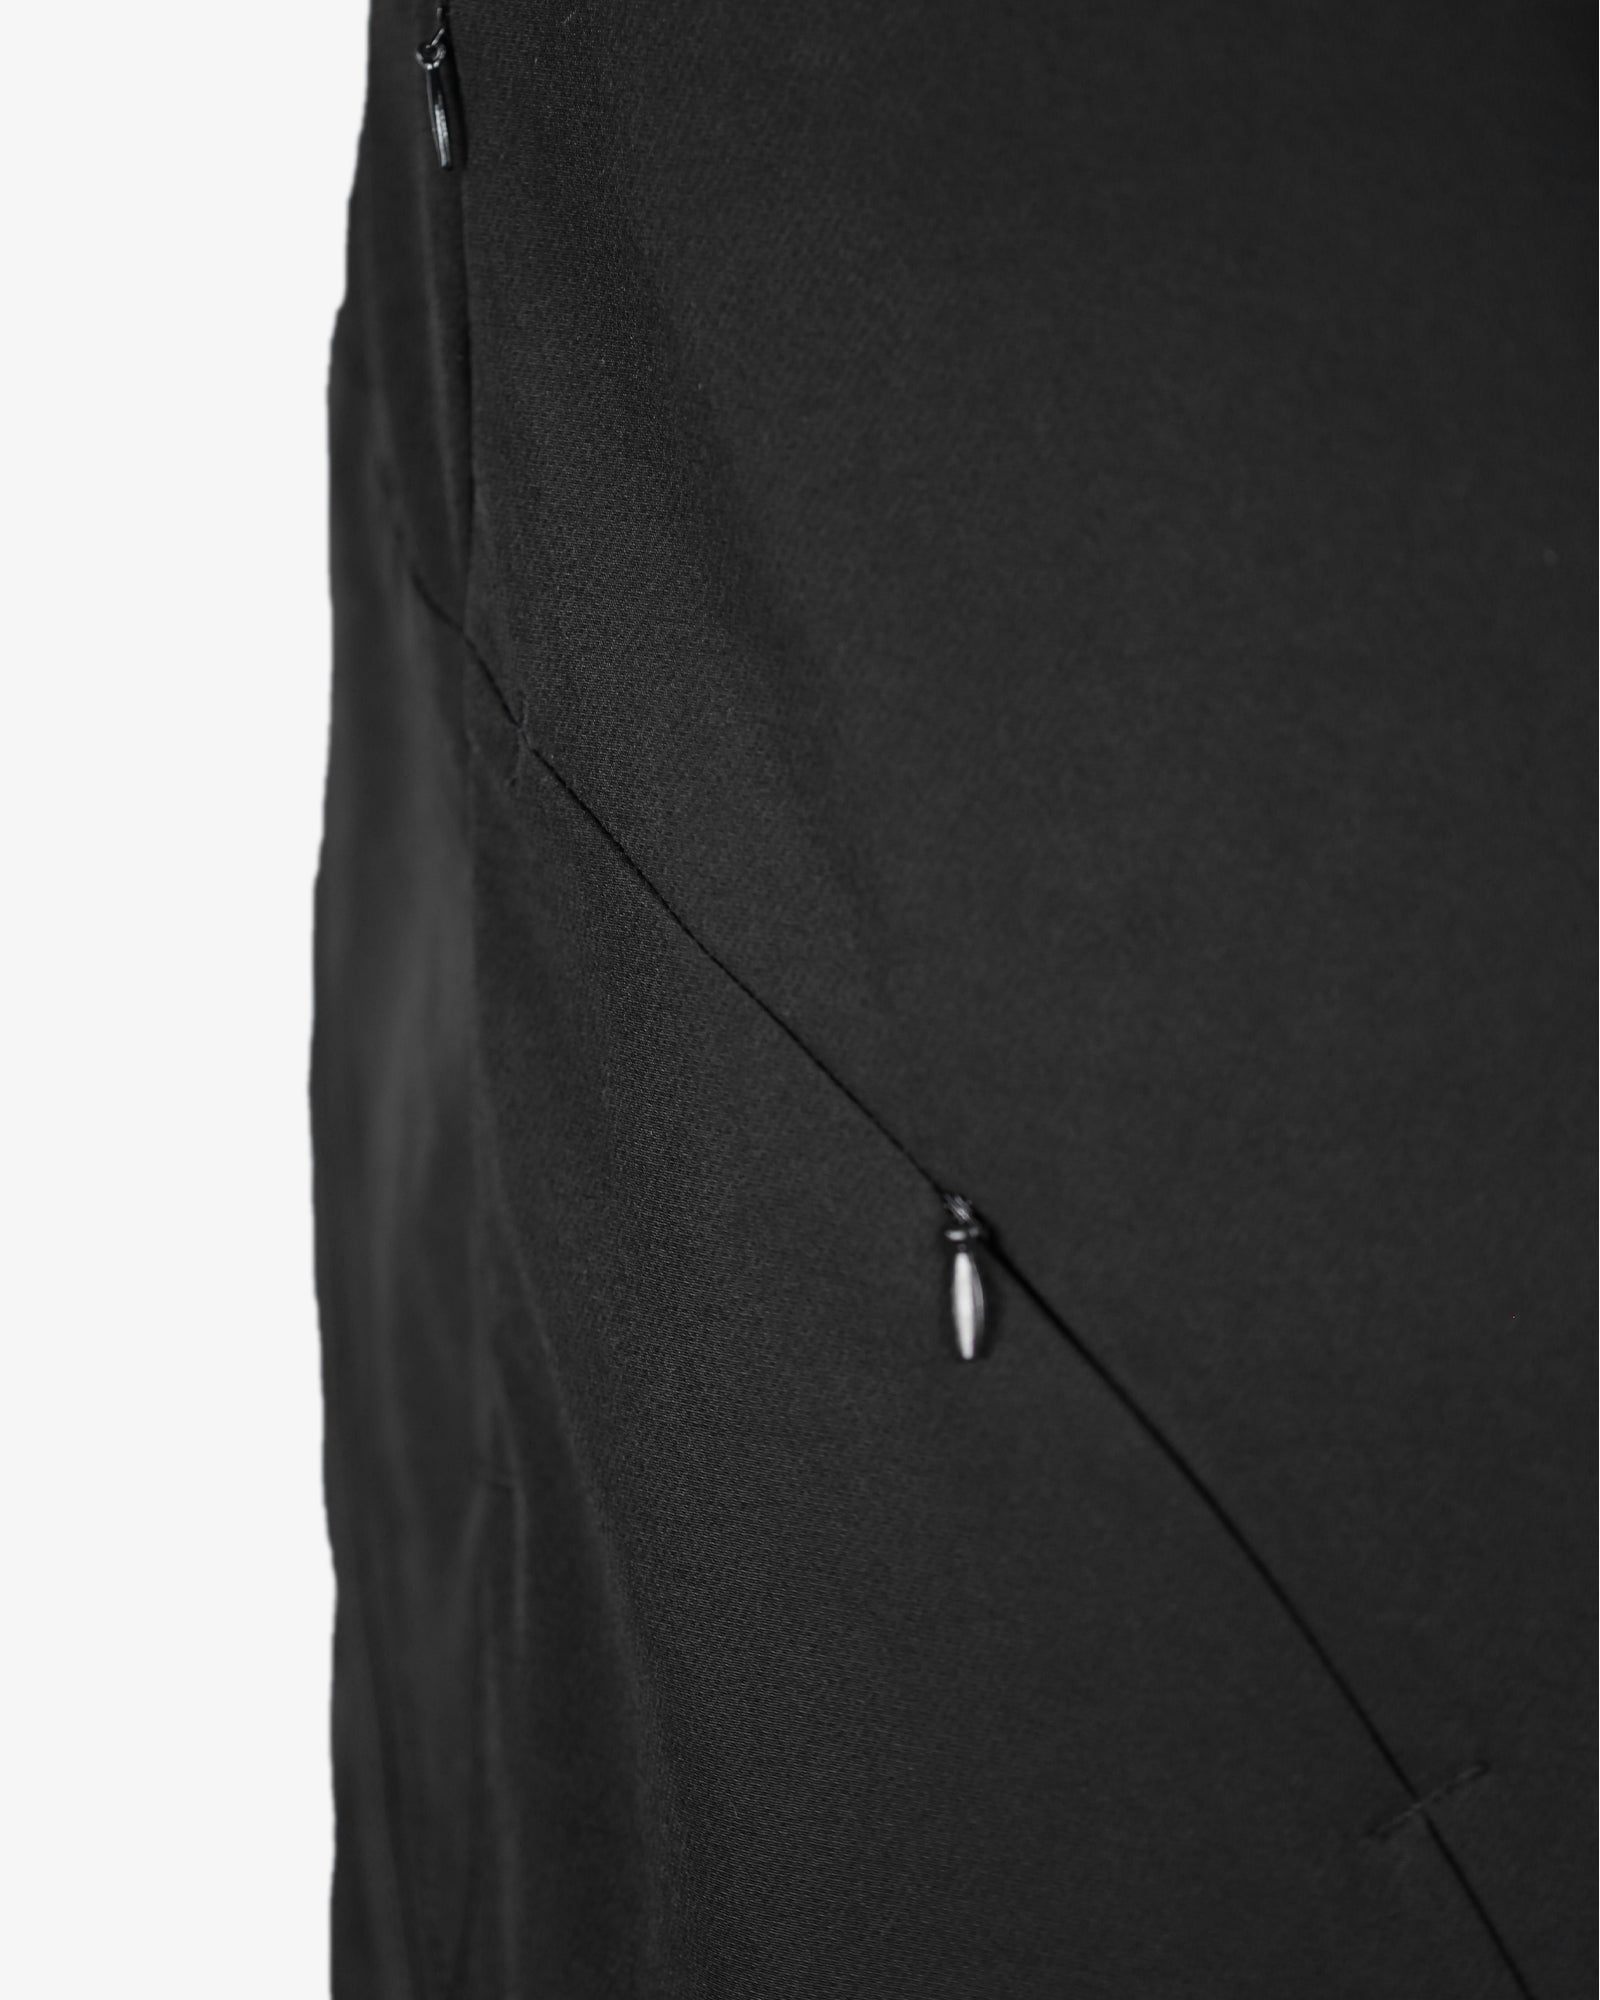 Water Repellent Oversized Tech Shorts